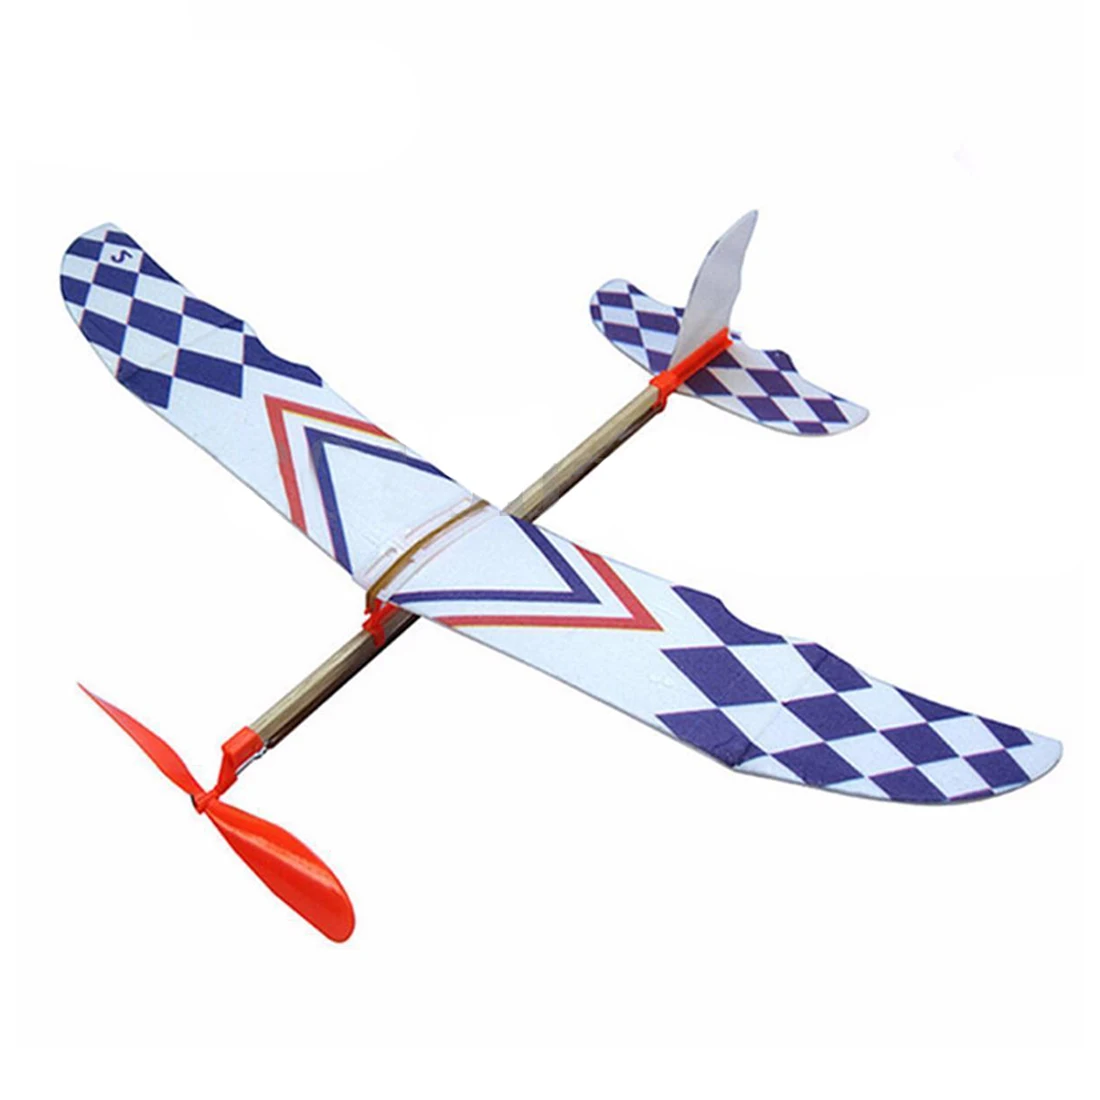 HOT SALE Elastic Rubber Band Powered DIY Foam Plane Model Kit Aircraft Educational Toy